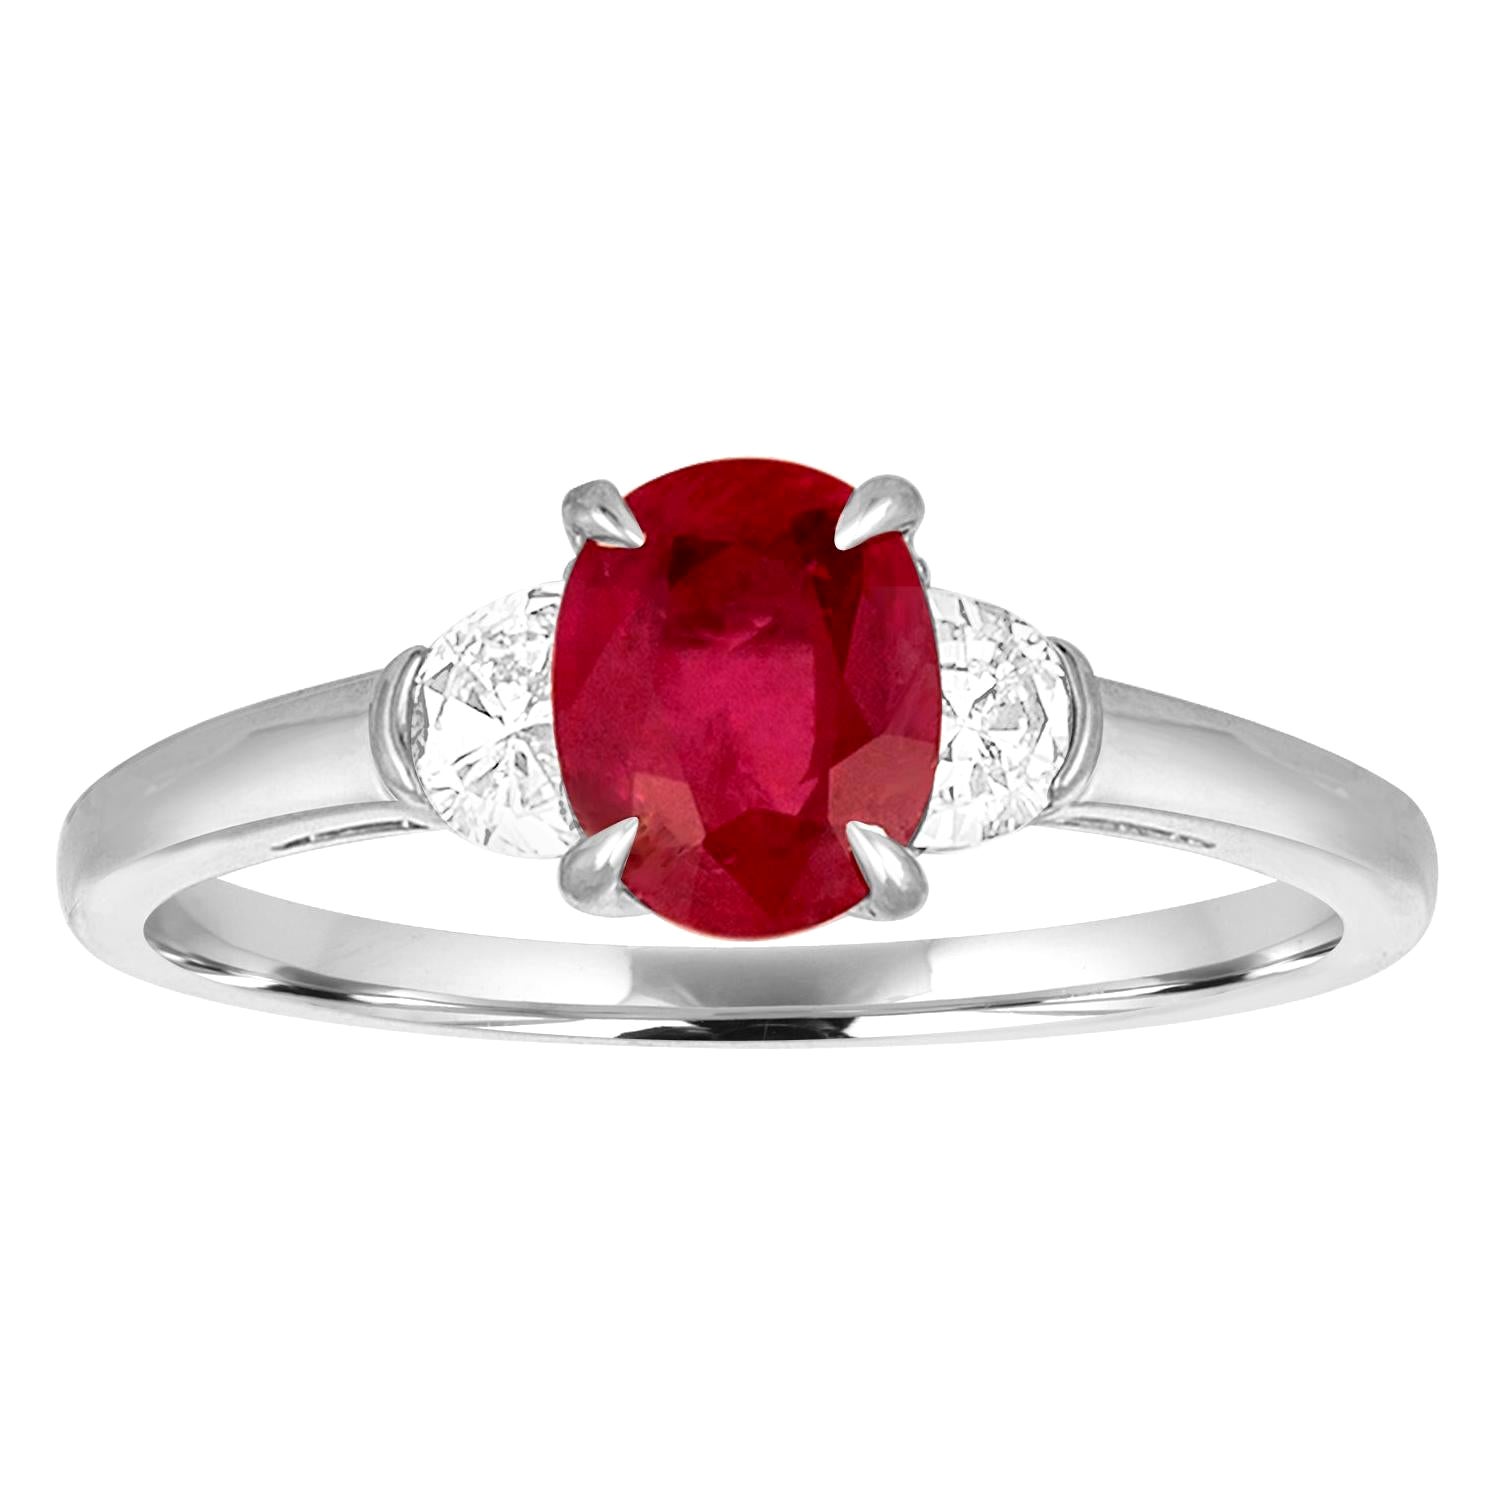 AGL Certified 1.04 Carat Oval Ruby Diamond Gold Ring